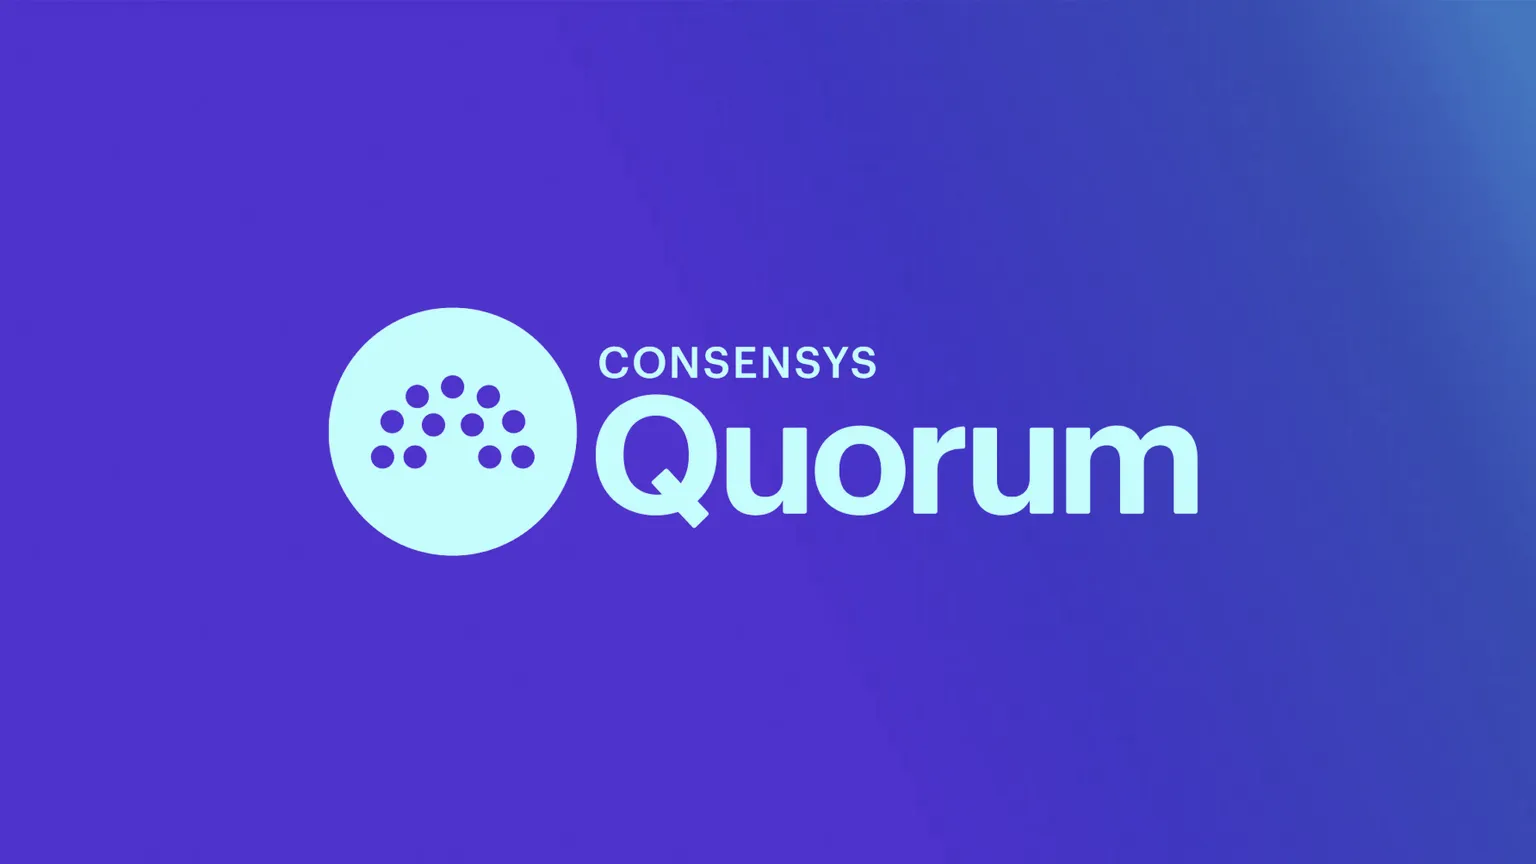 Quorum will remain an open-source platform under the new brand. Image: ConsenSys